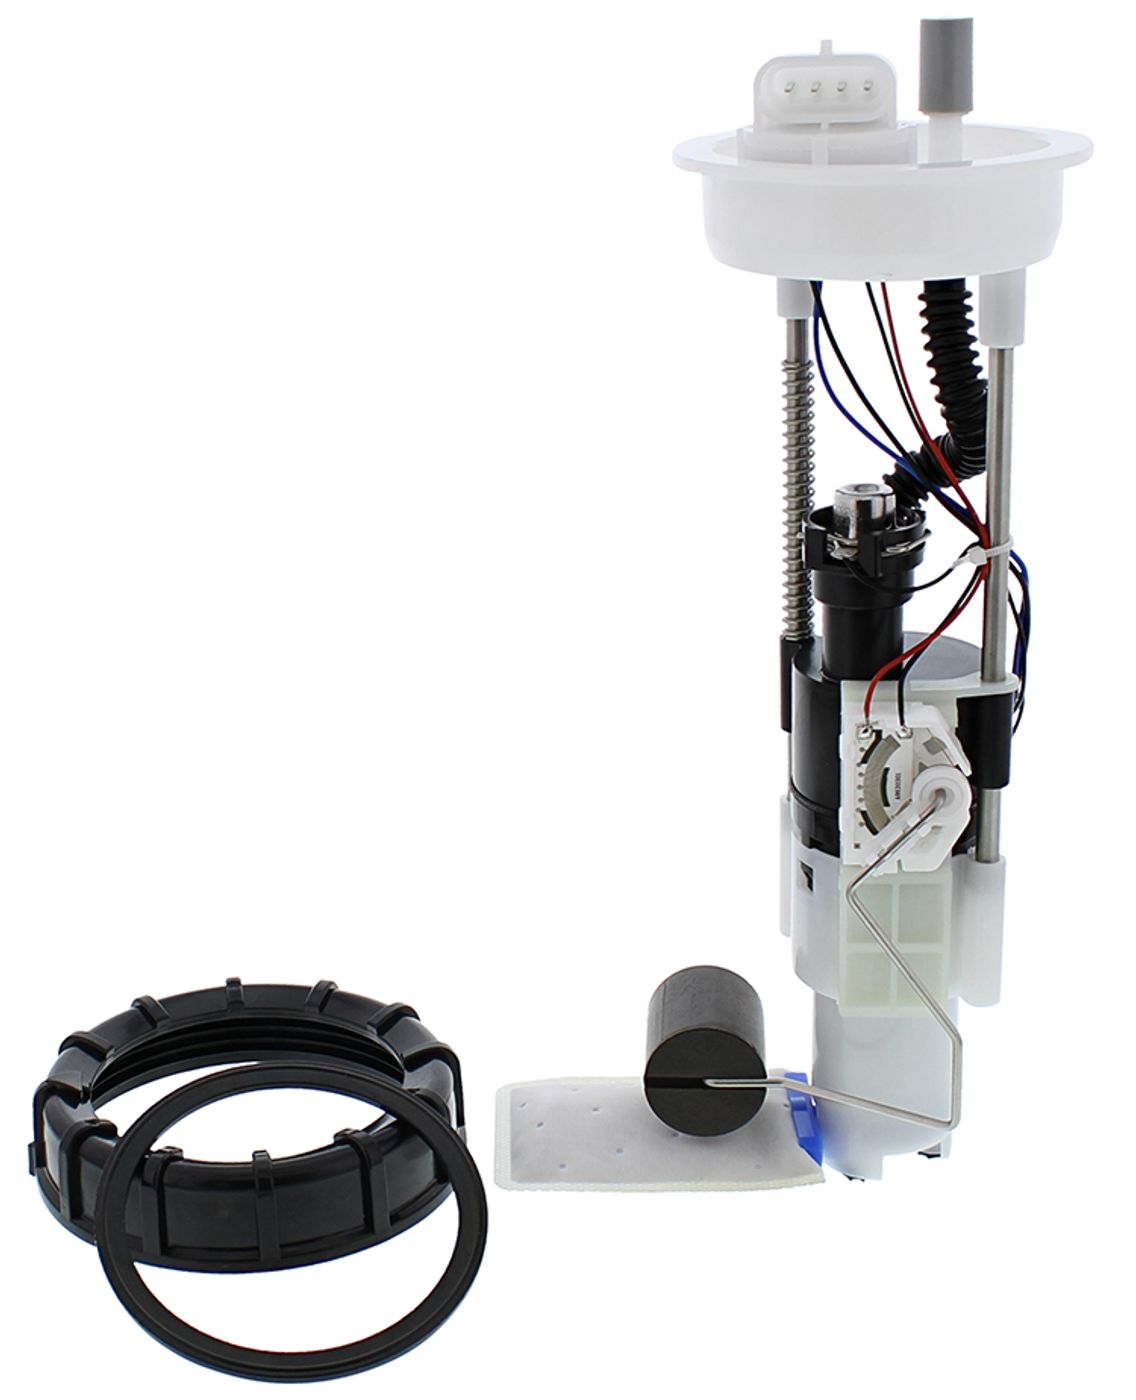 Wrp Fuel Pump Modules - WRP471007 image